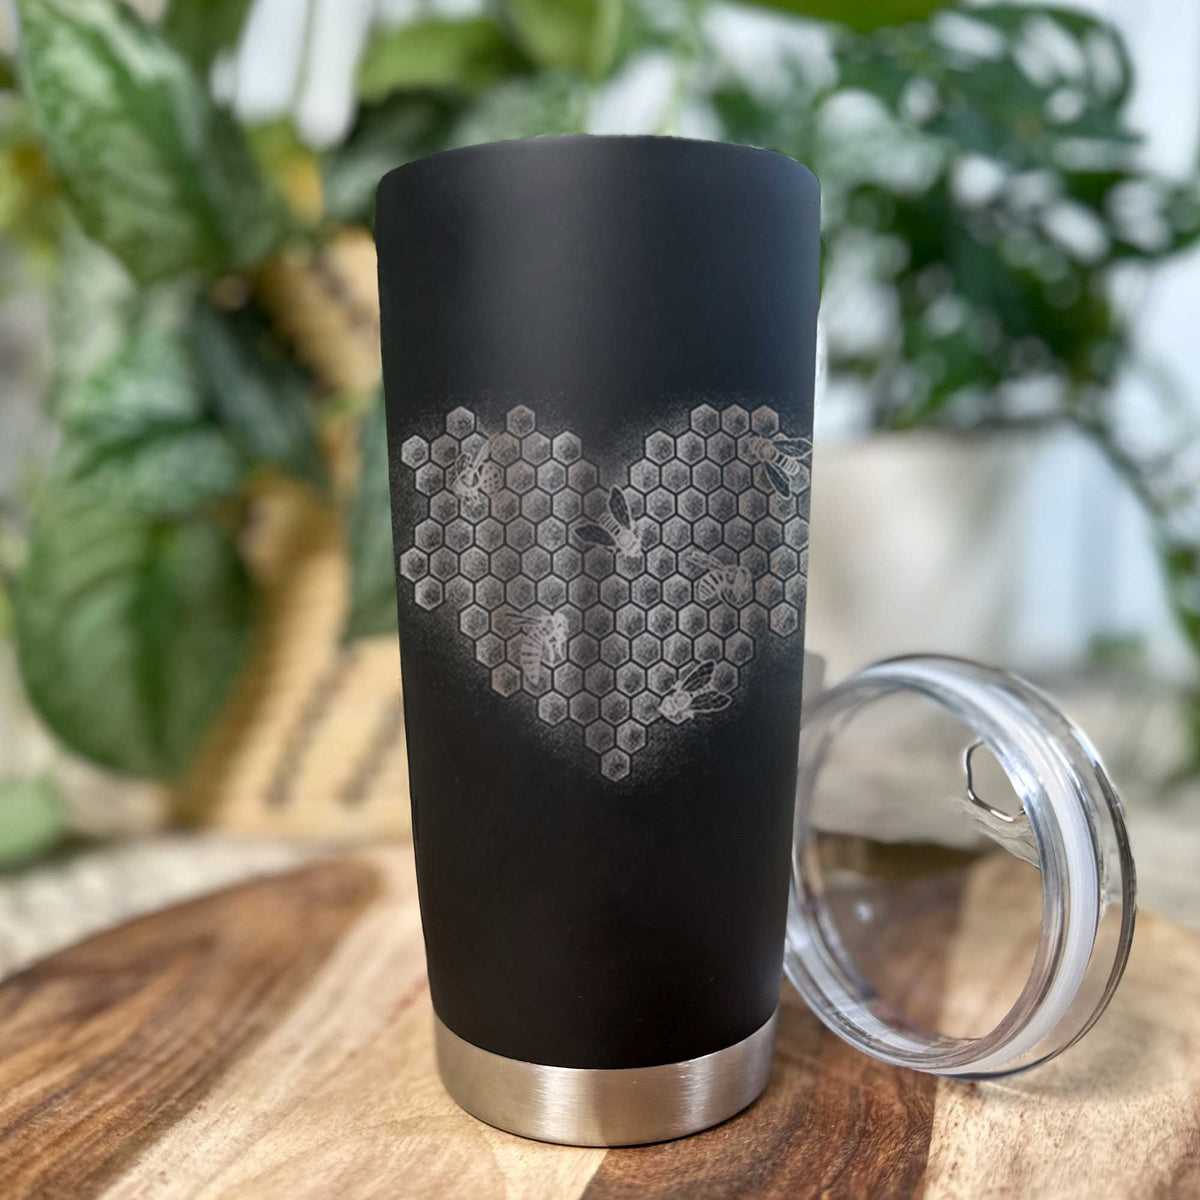 Honeycomb Heart with Bees - 20oz Polar Insulated Tumbler